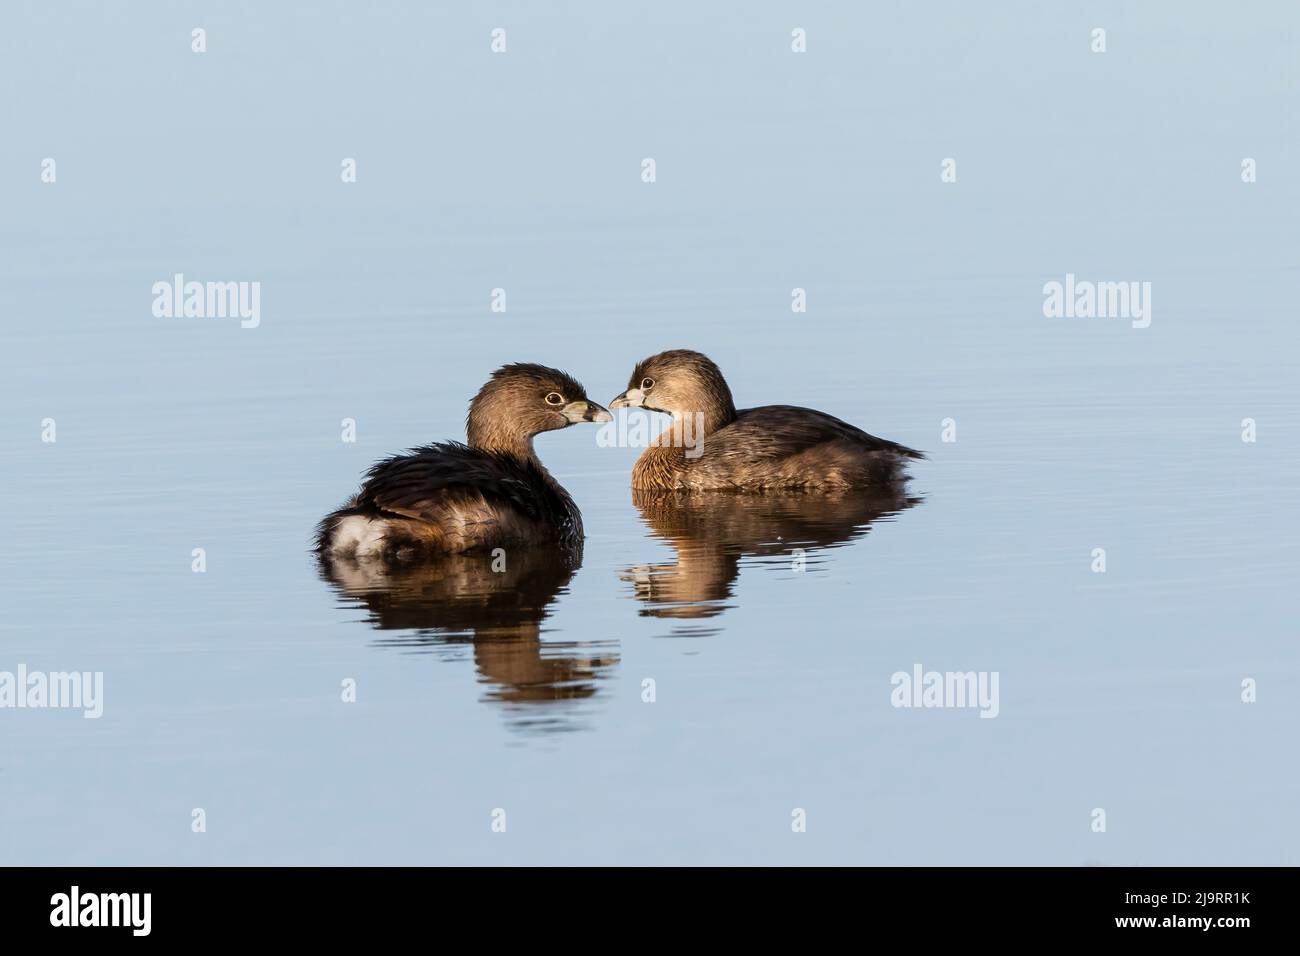 Pied-billed grebes in wetland, Marion County, Illinois. Stock Photo